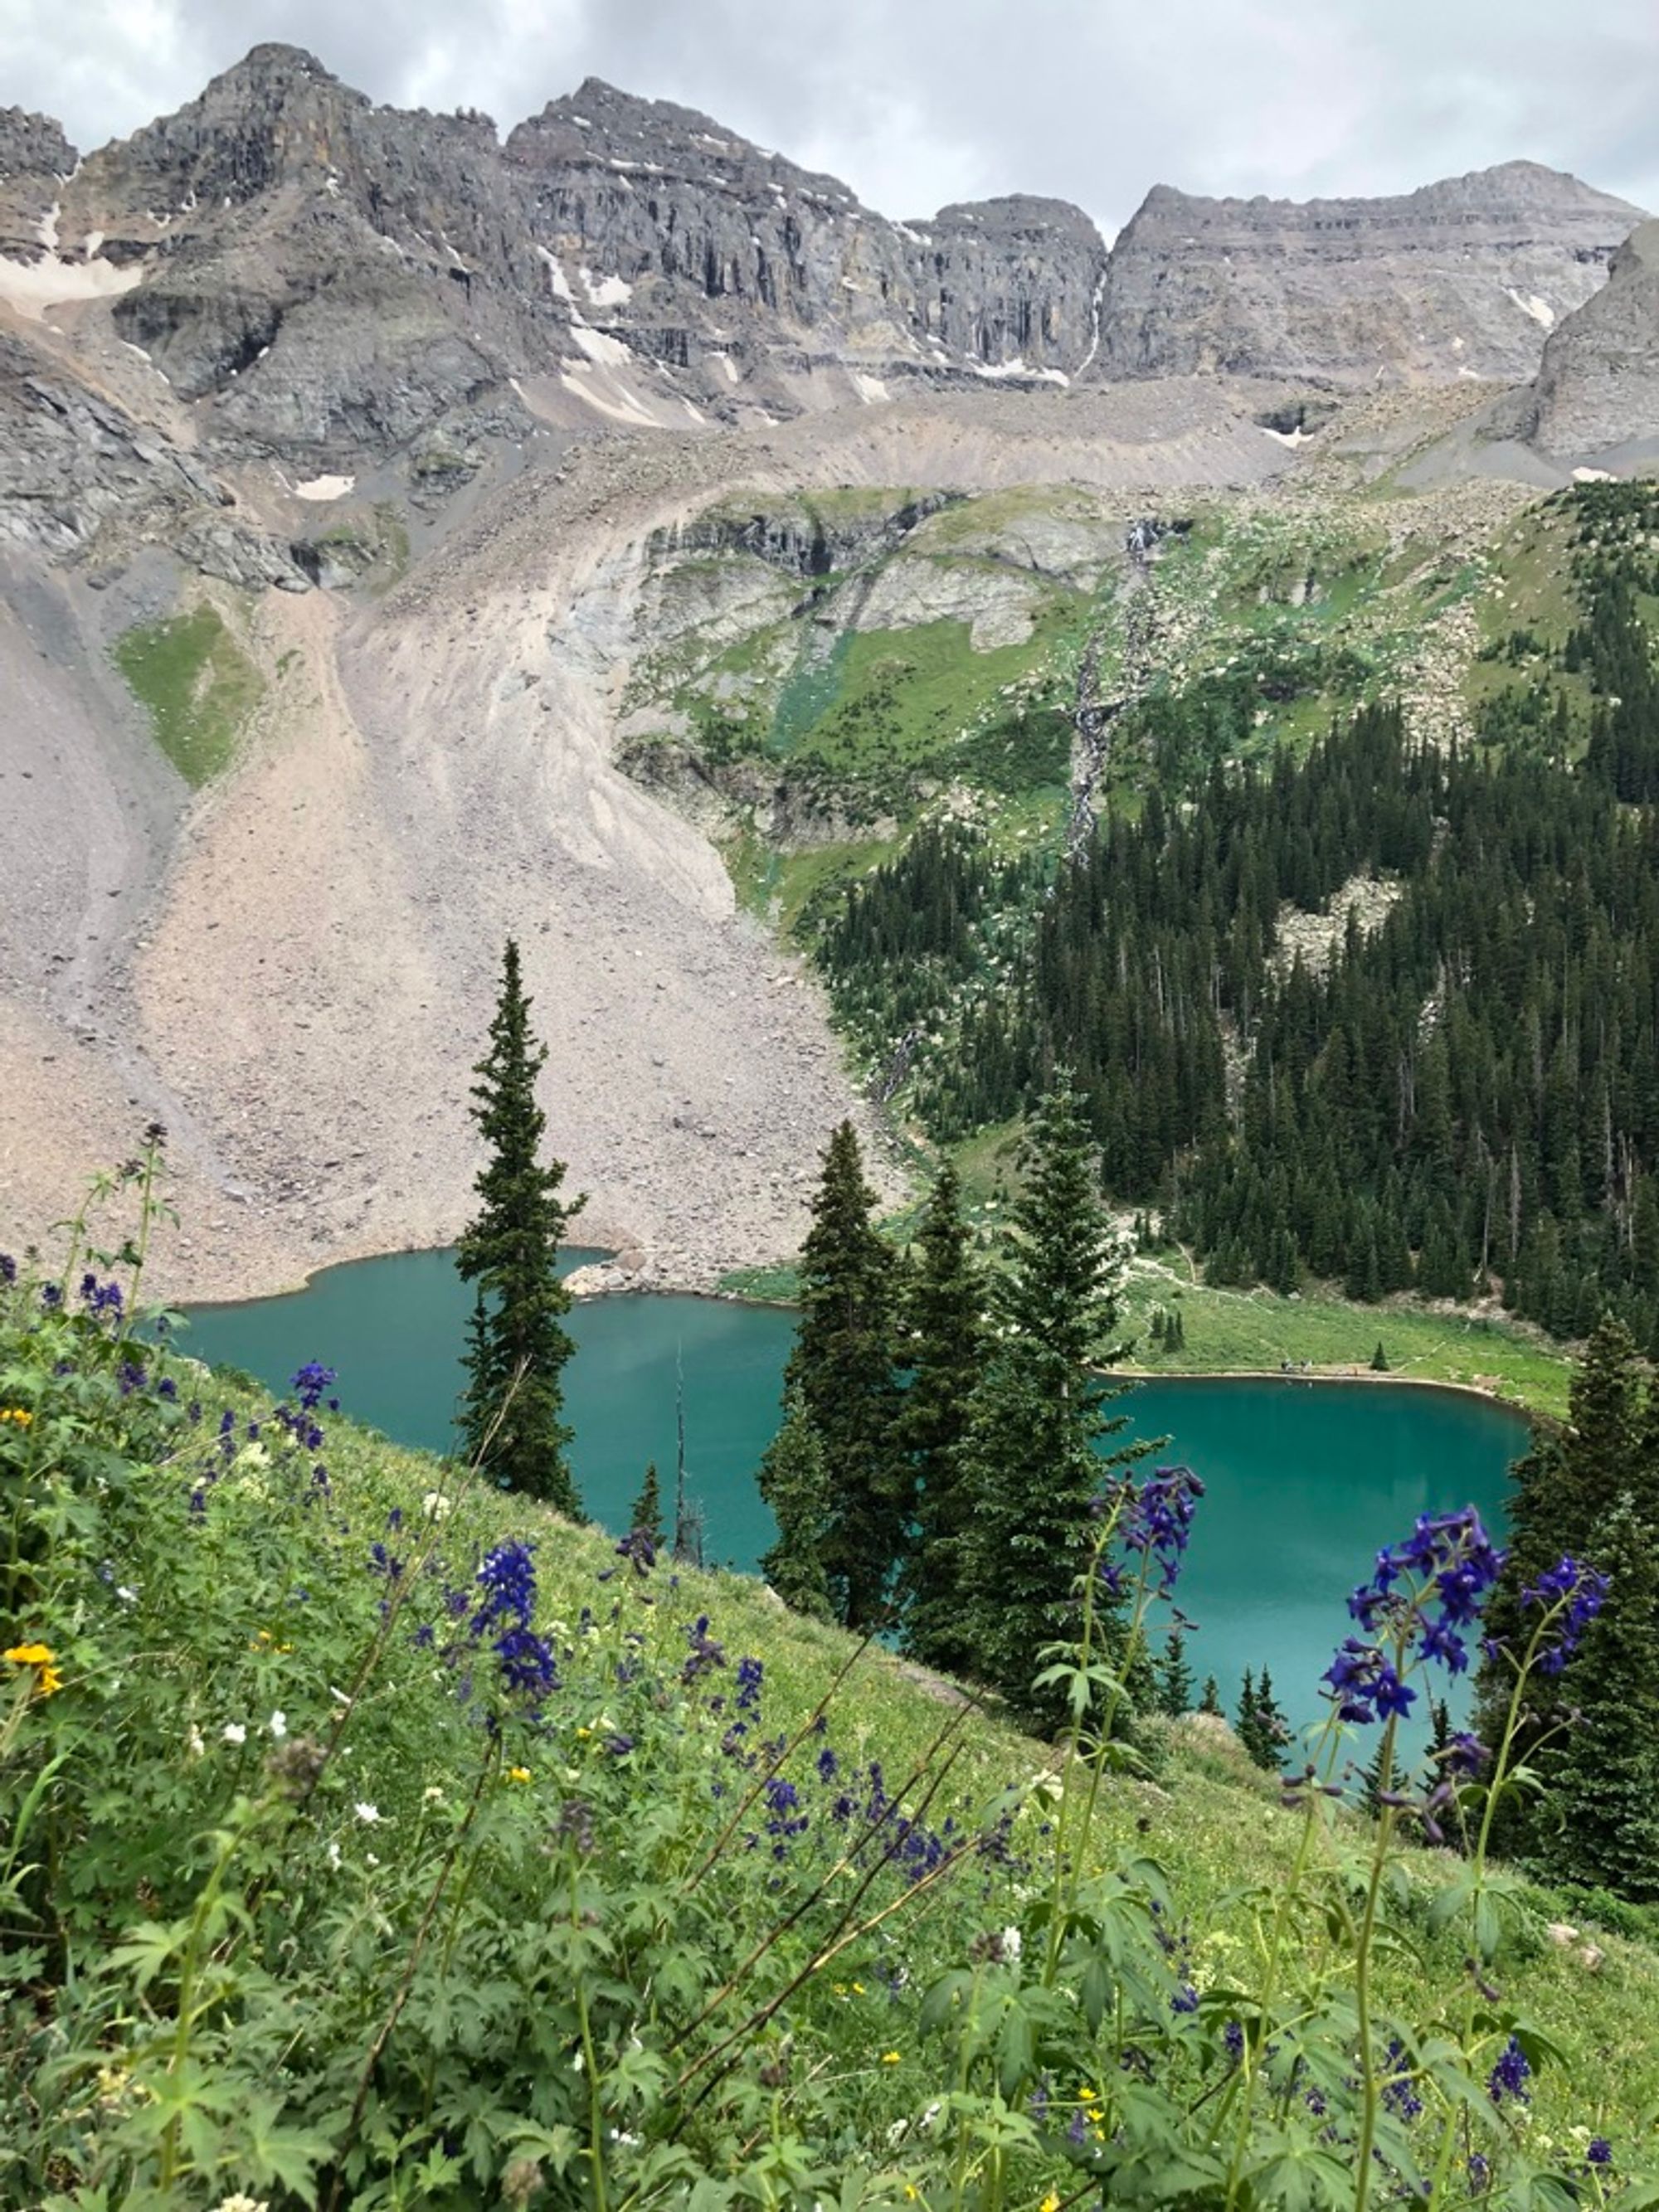 Wild flowers overlooking a Blue Lake, a ridge line rising above.